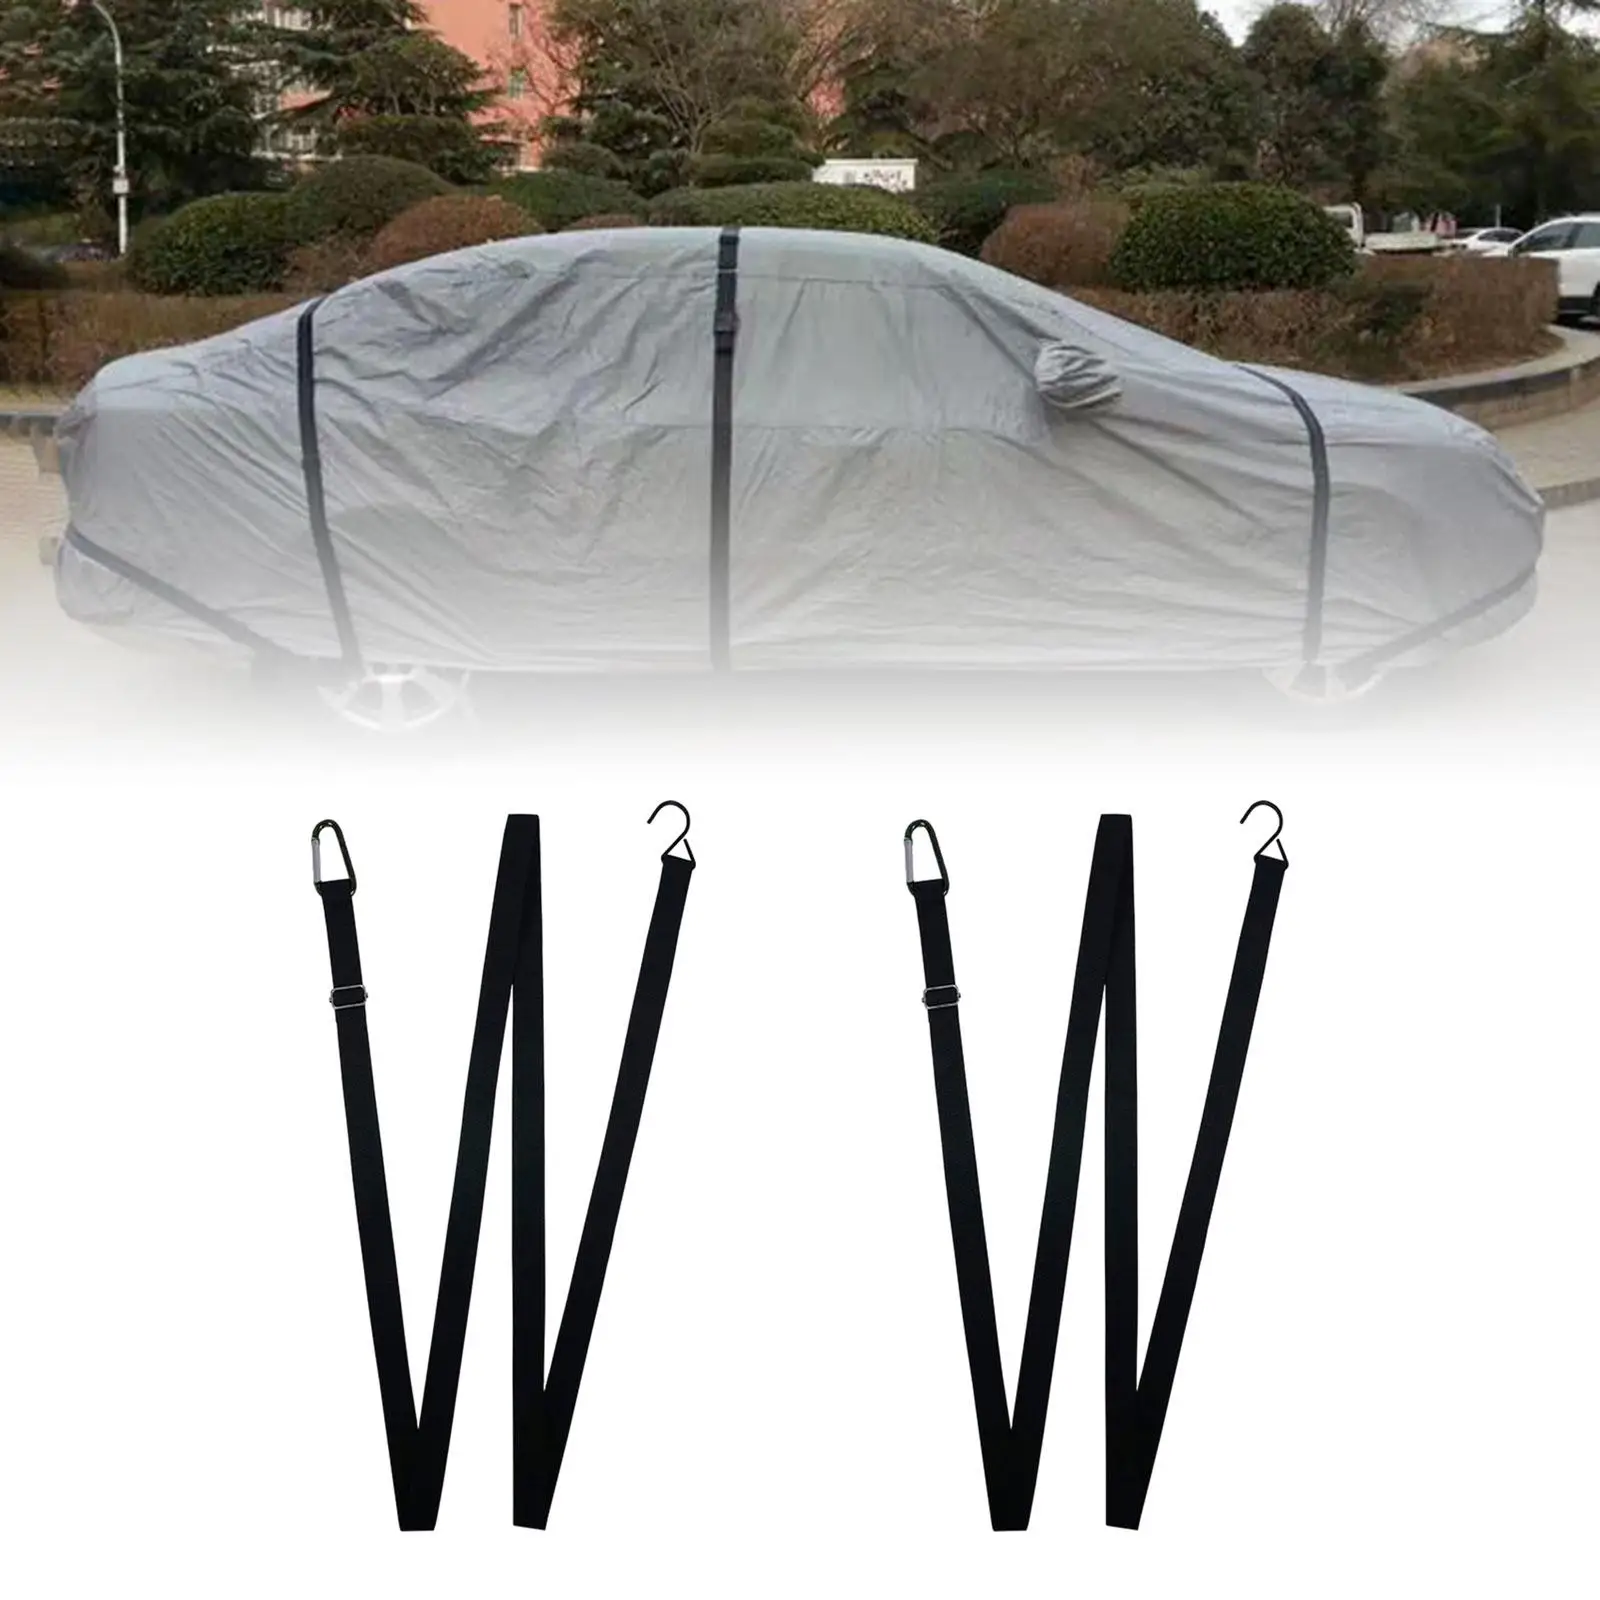 Car Cover Straps Wind Protector Car Cover Gust Straps for Automobiles